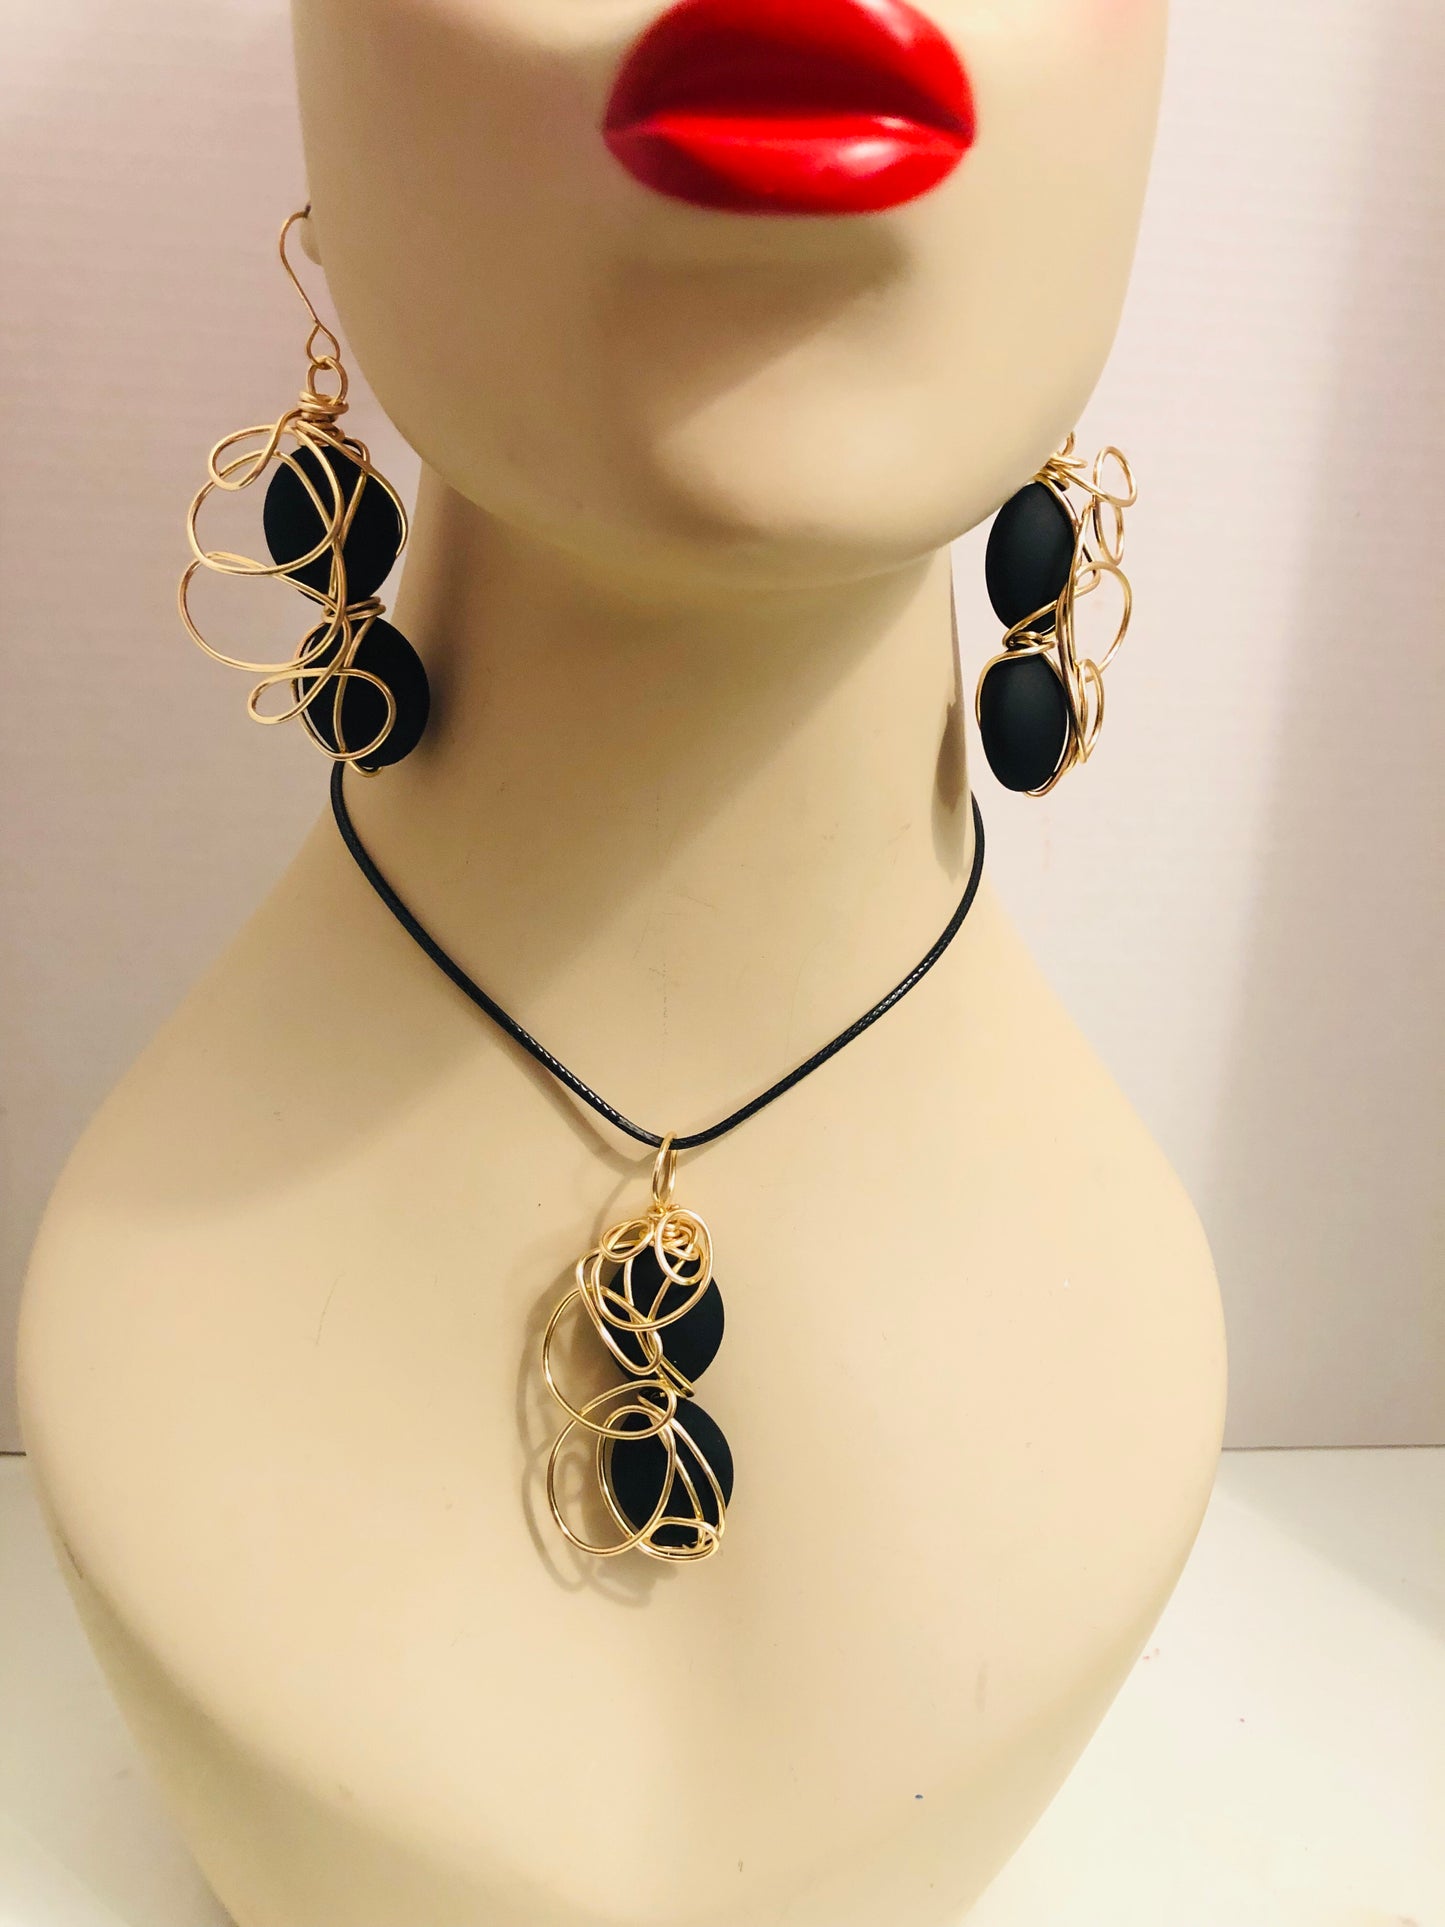 Black Matte and Gold Earrings and Necklace set.